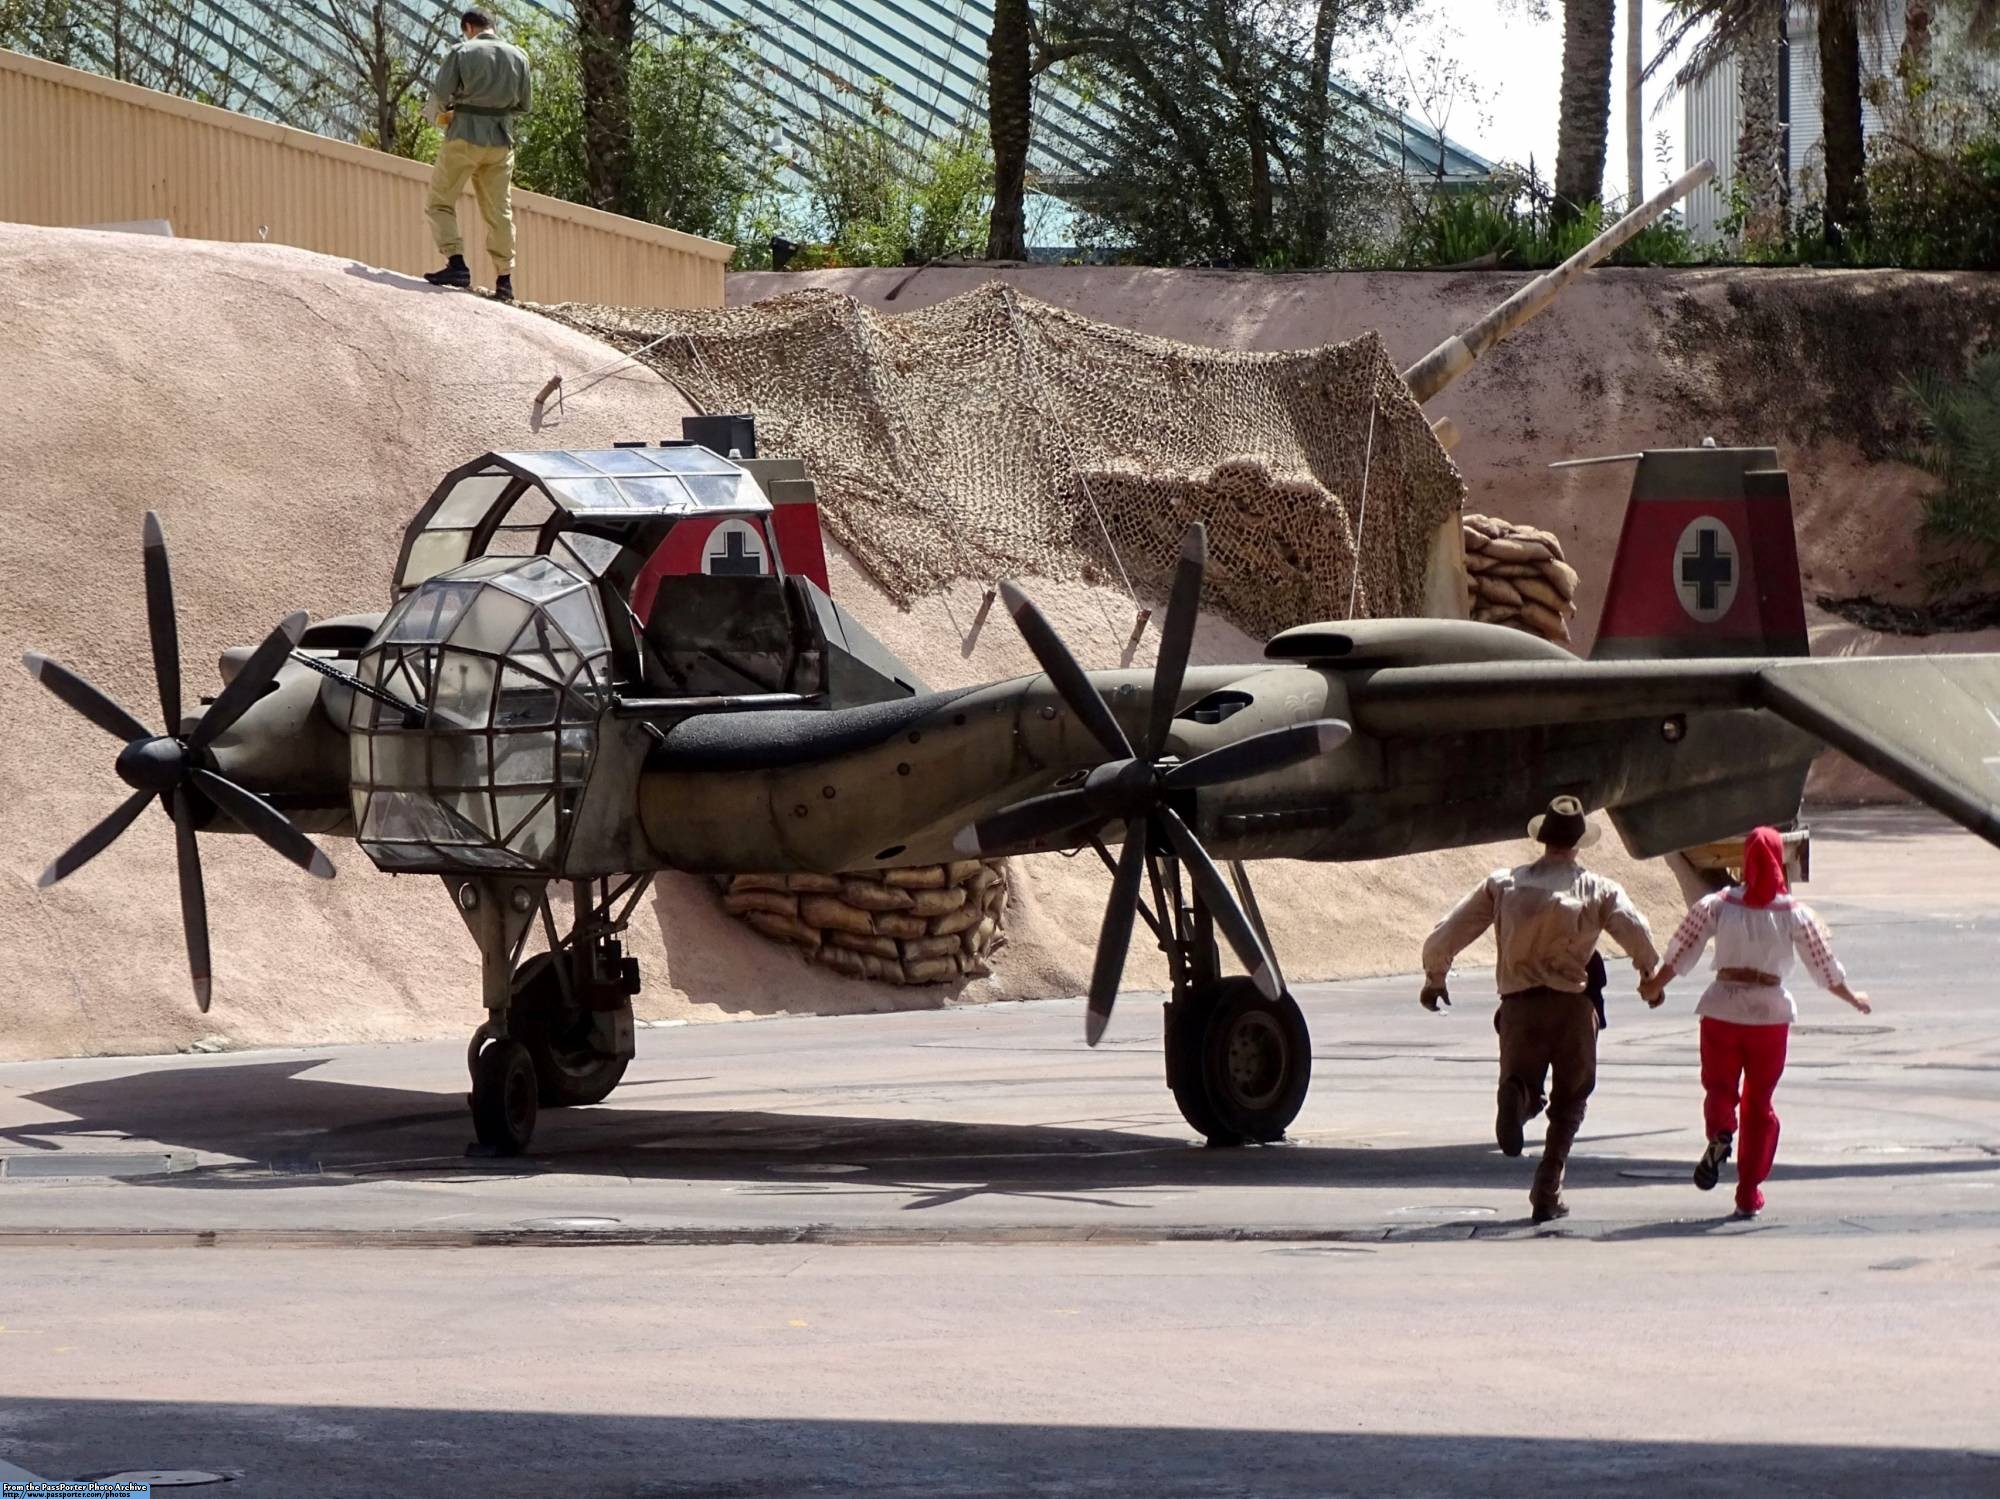 Plan a 'George Lucas'-themed day at Hollywood Studios |PassPorter.com